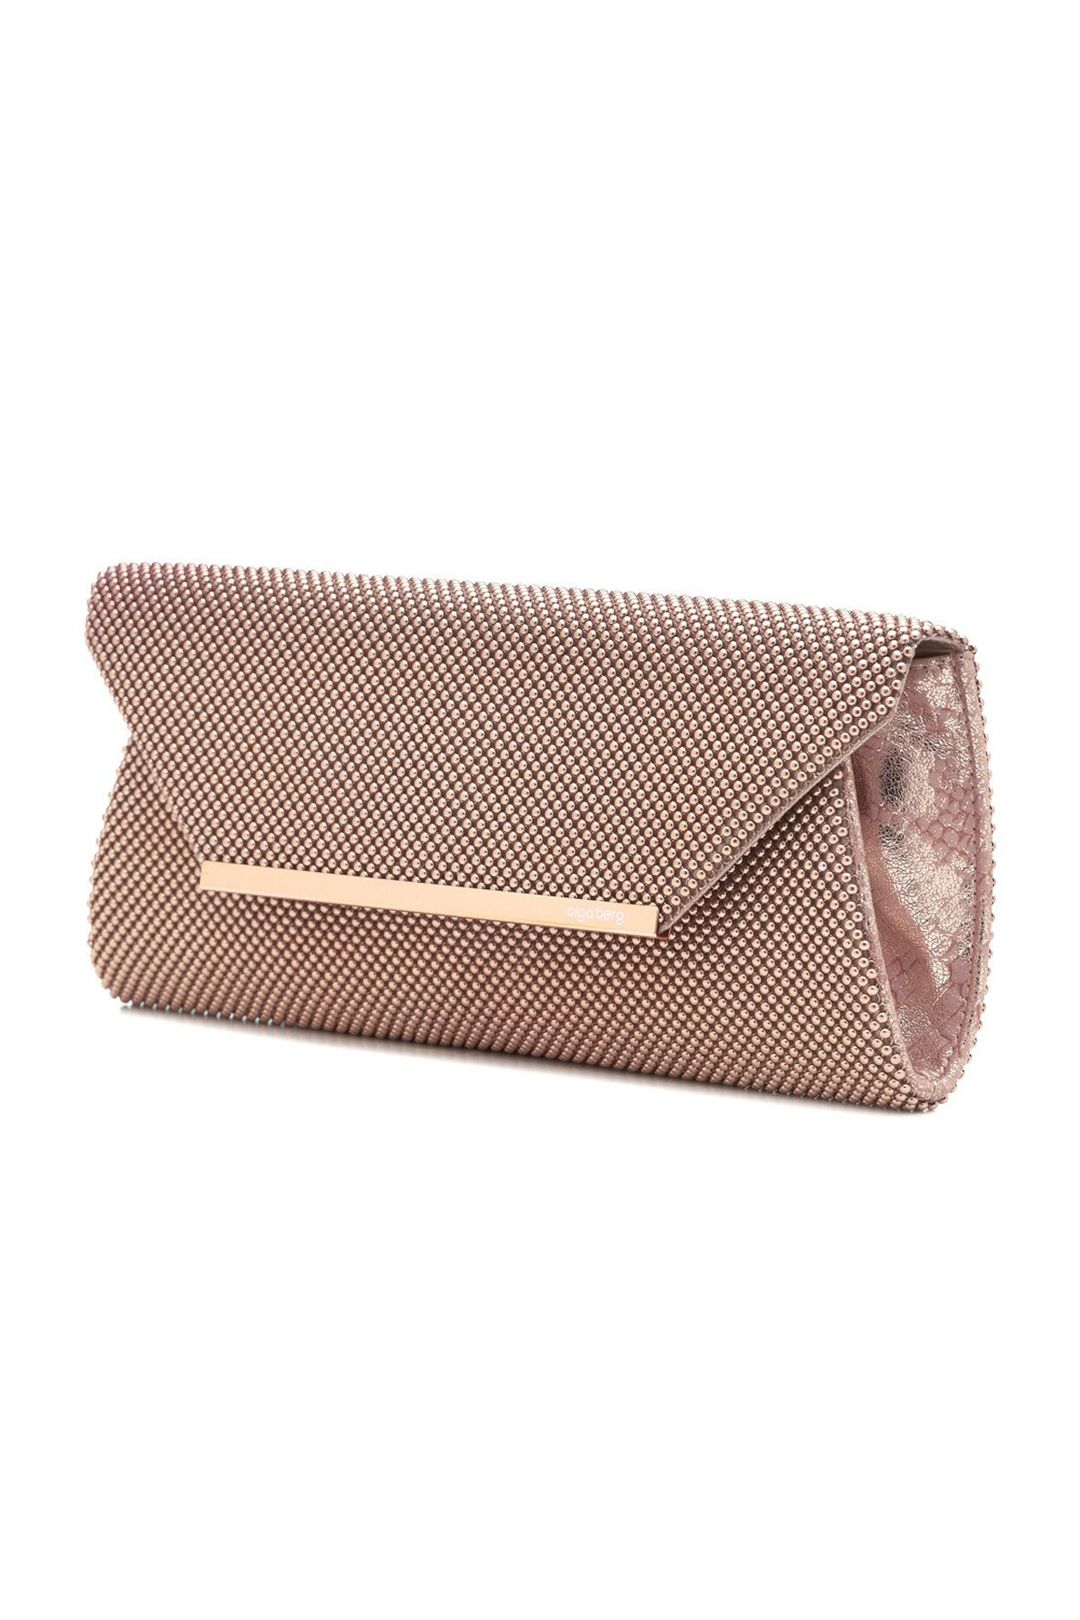 Eloise Ball Mesh Clutch in Rose Gold by Olga Berg for Hire